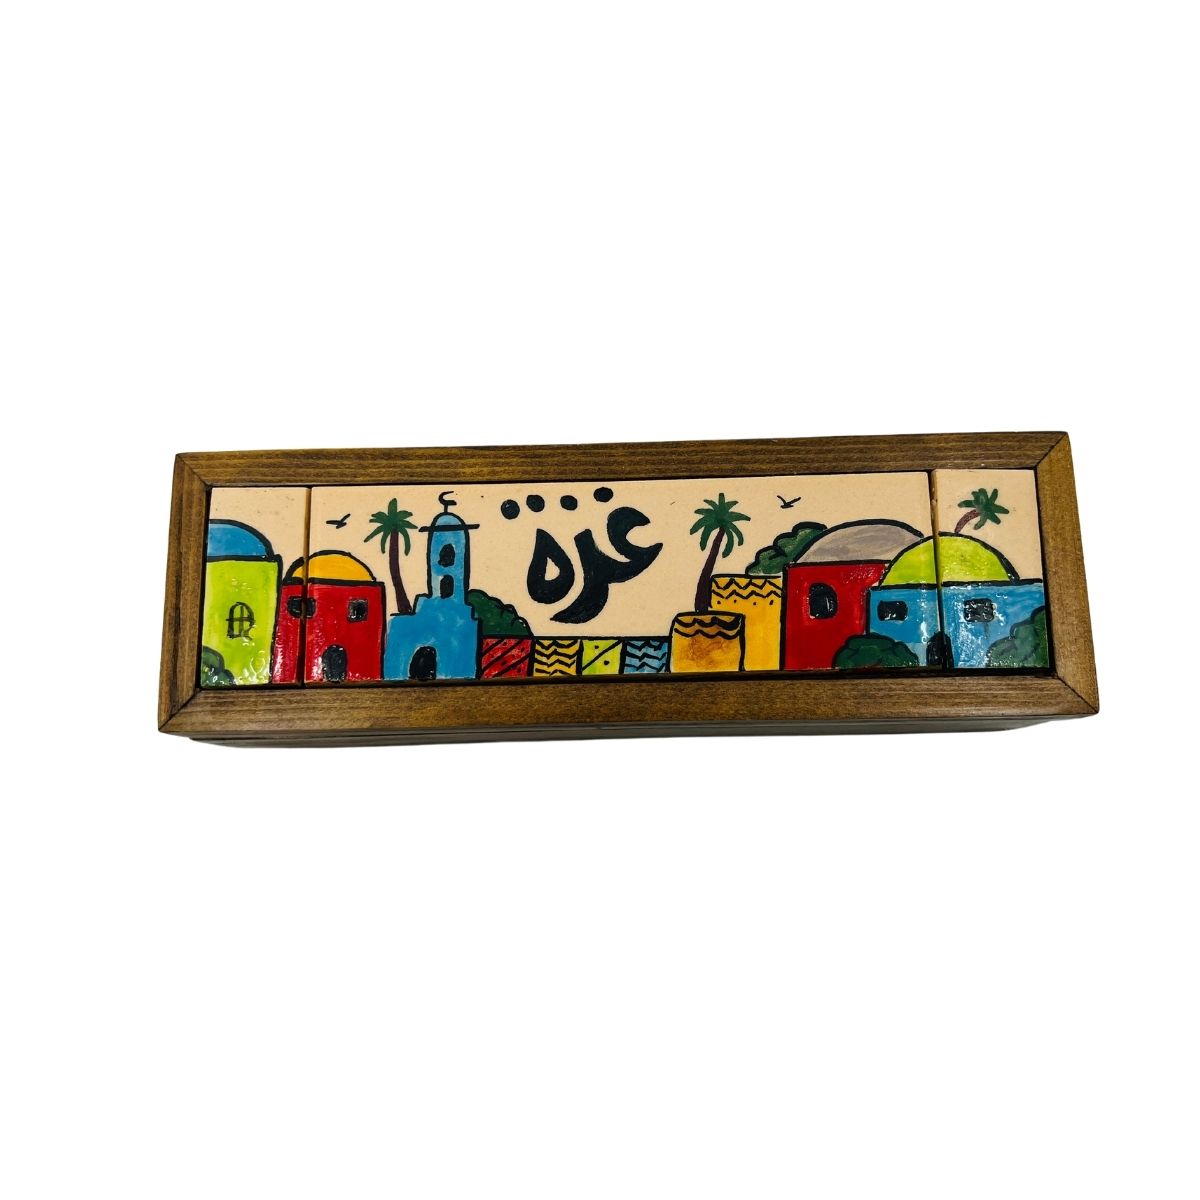 Handcrafted Wooden Box from Gaza